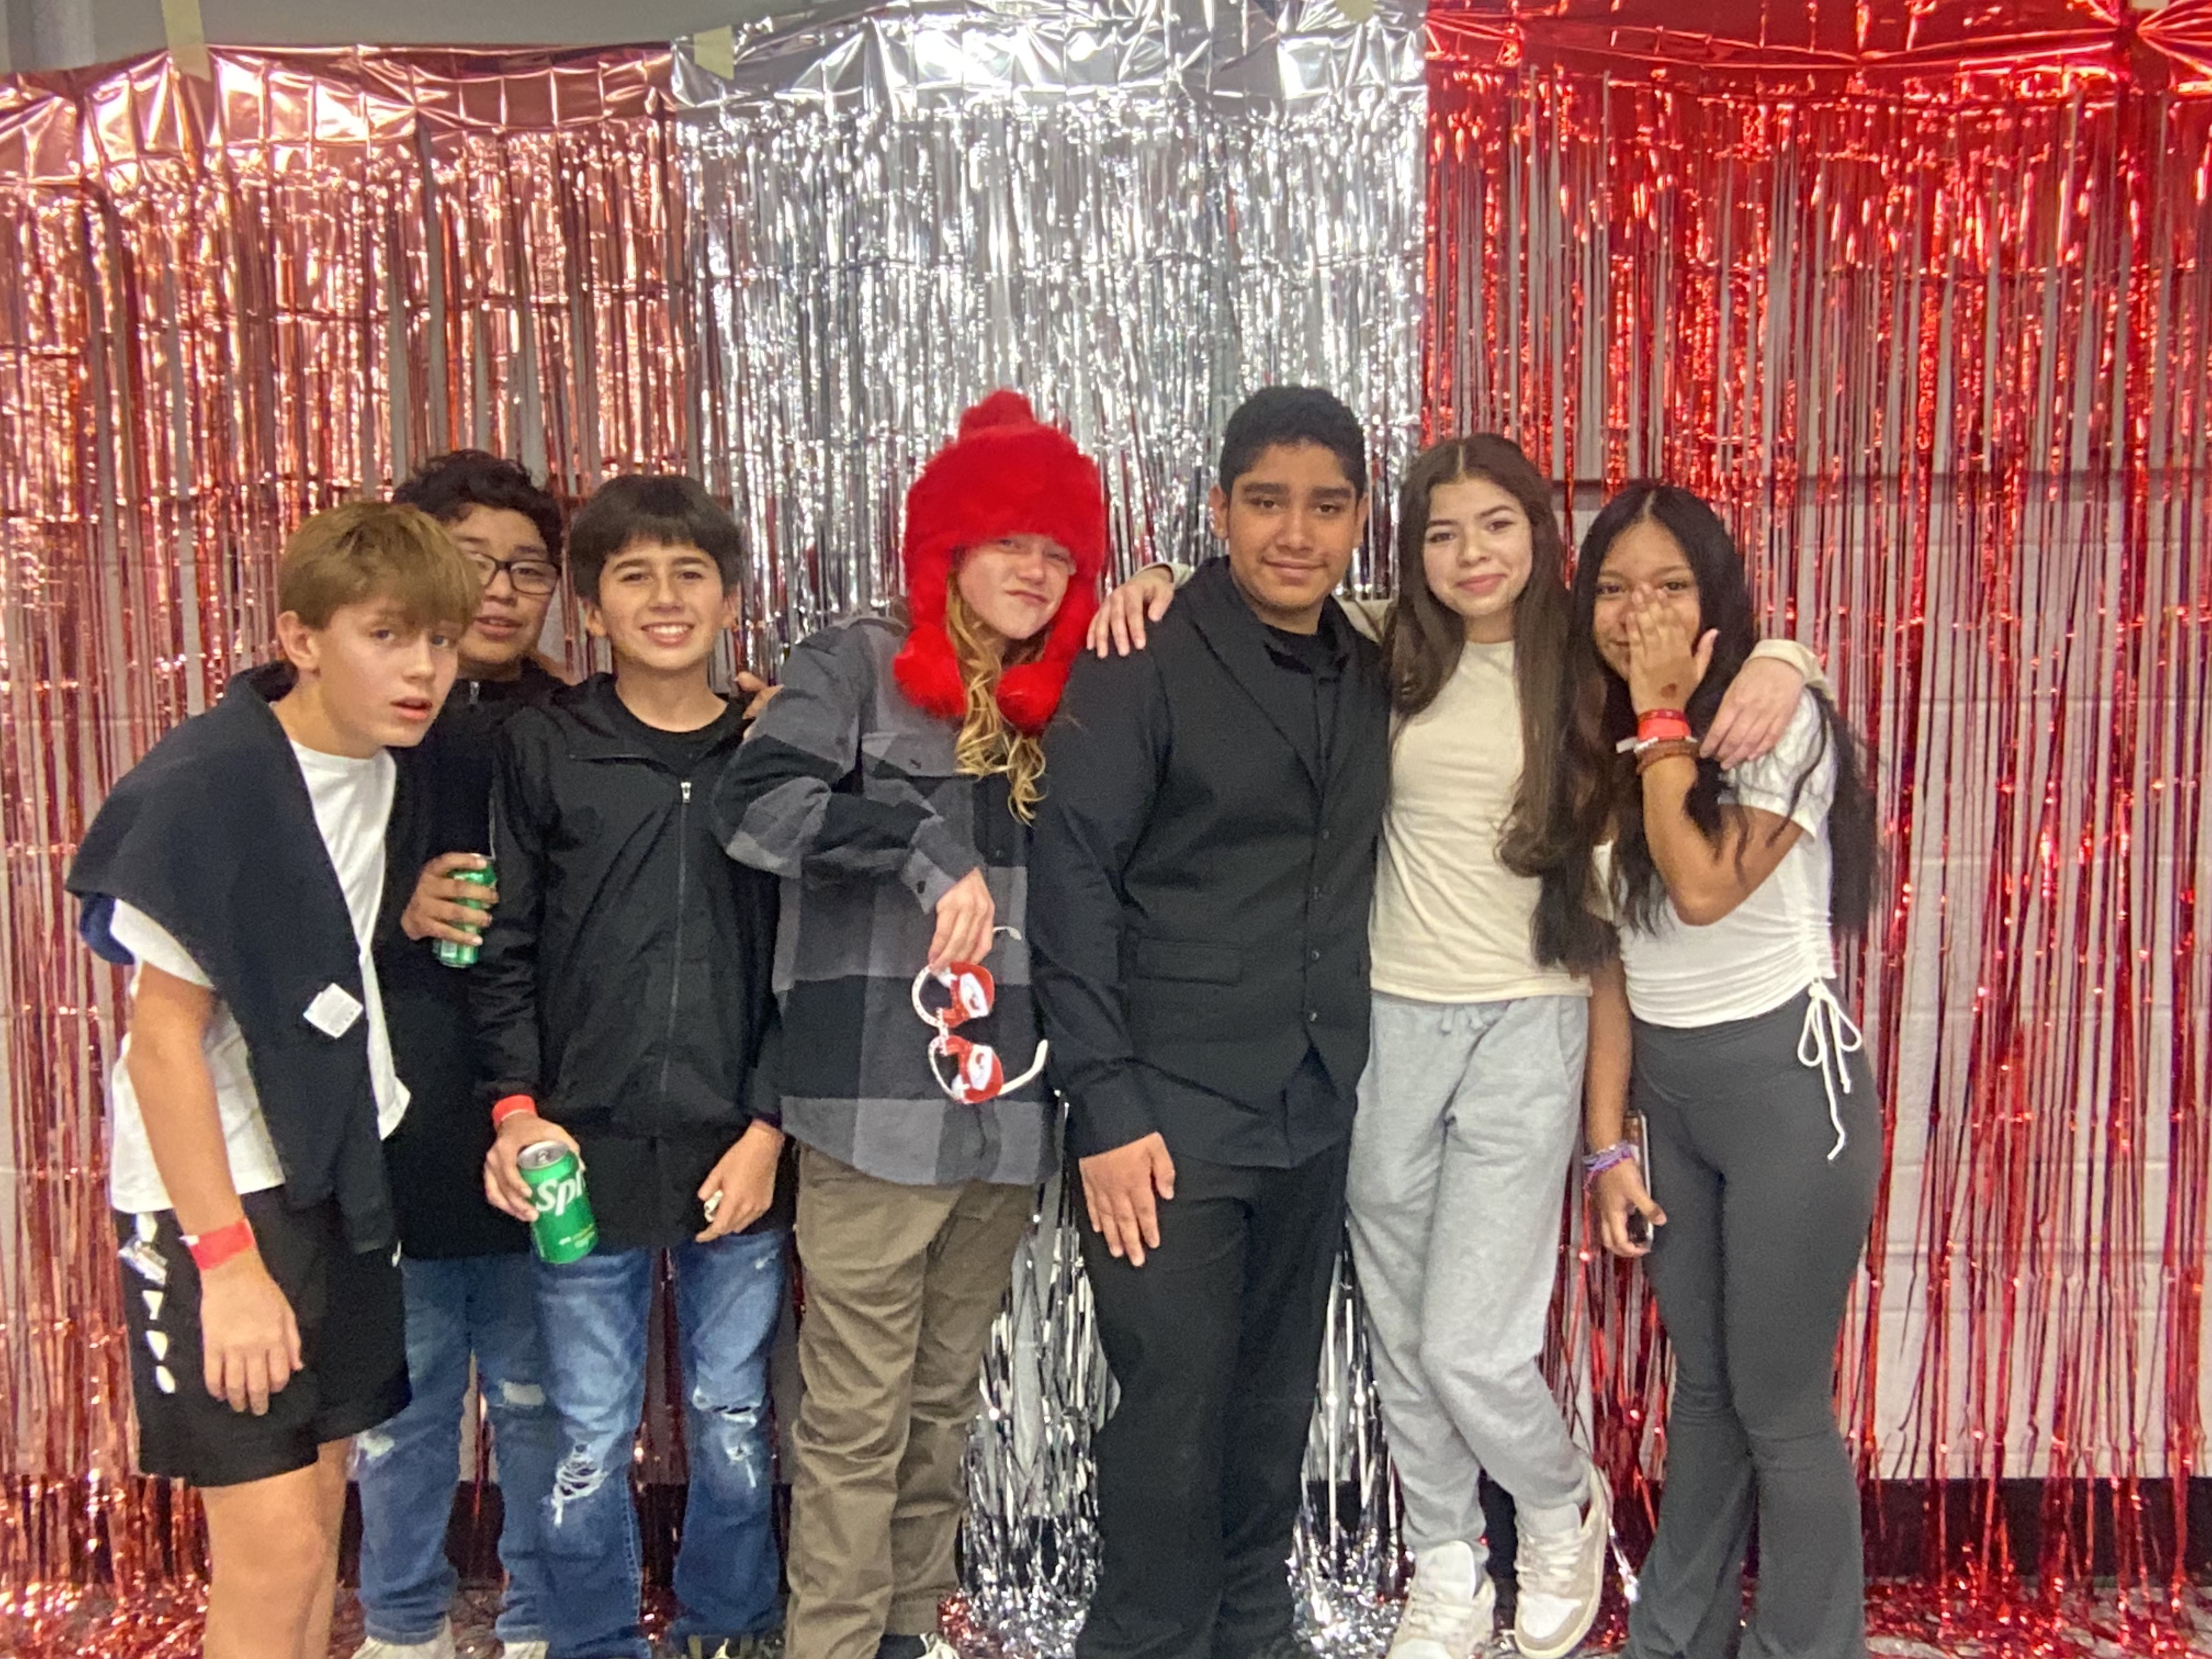 students at a school dance in front of a streamer background